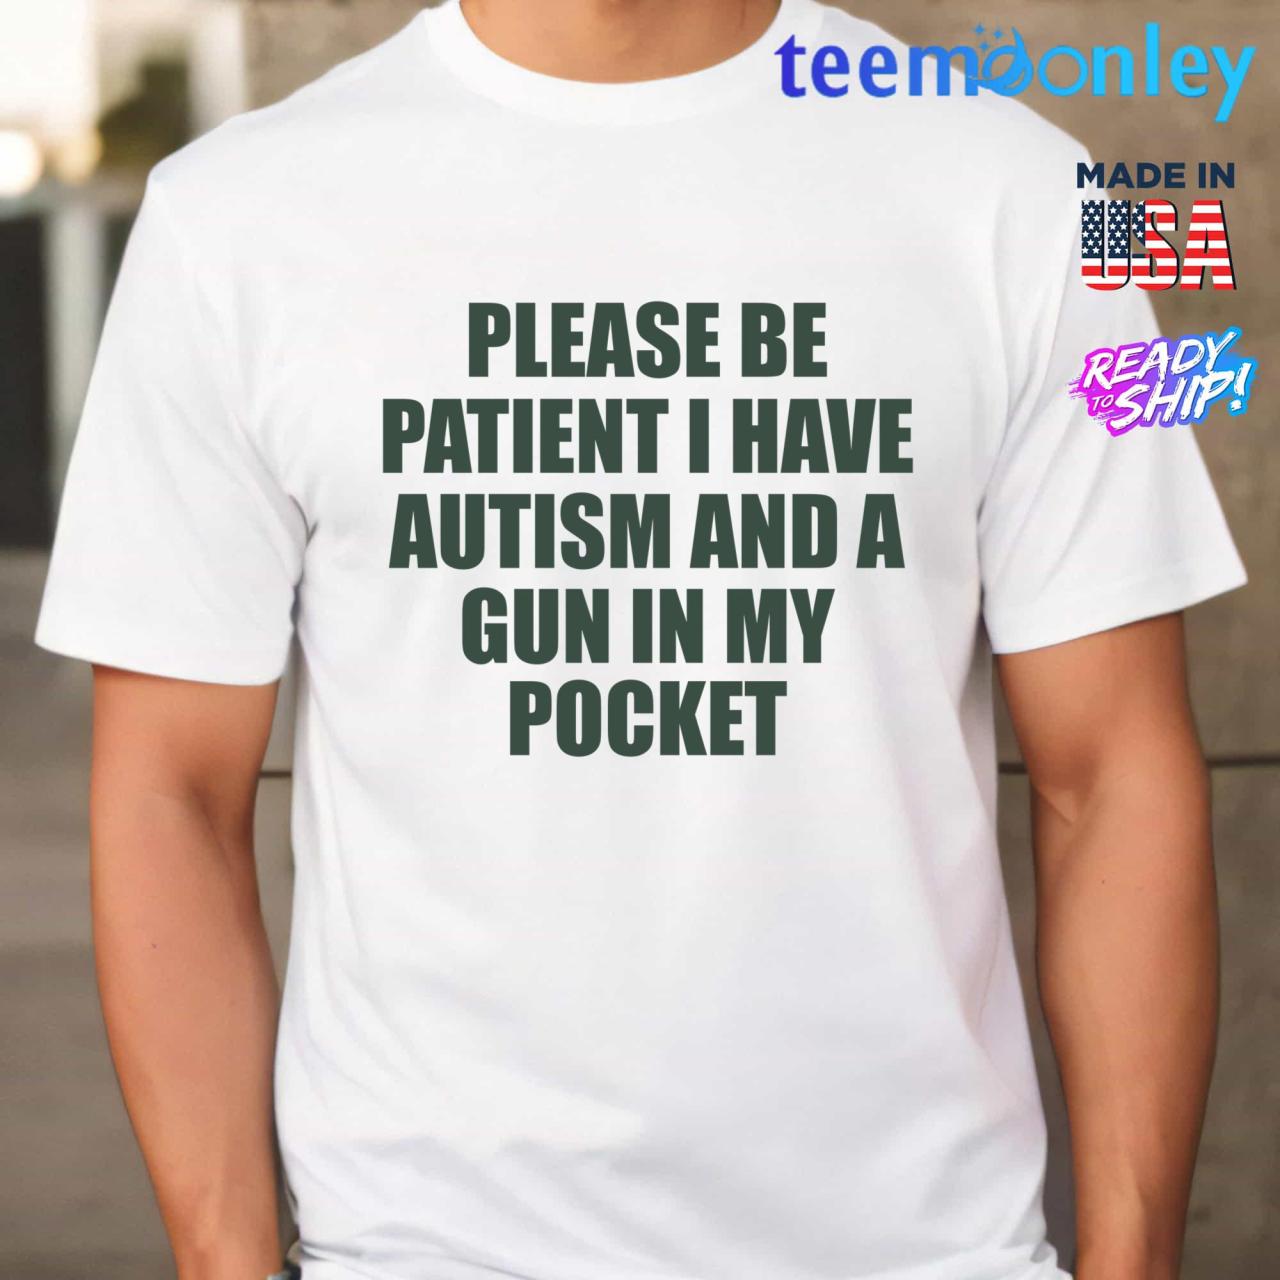 A white Tshirt that says "Please be patient I have autism and a gun in my pocket"